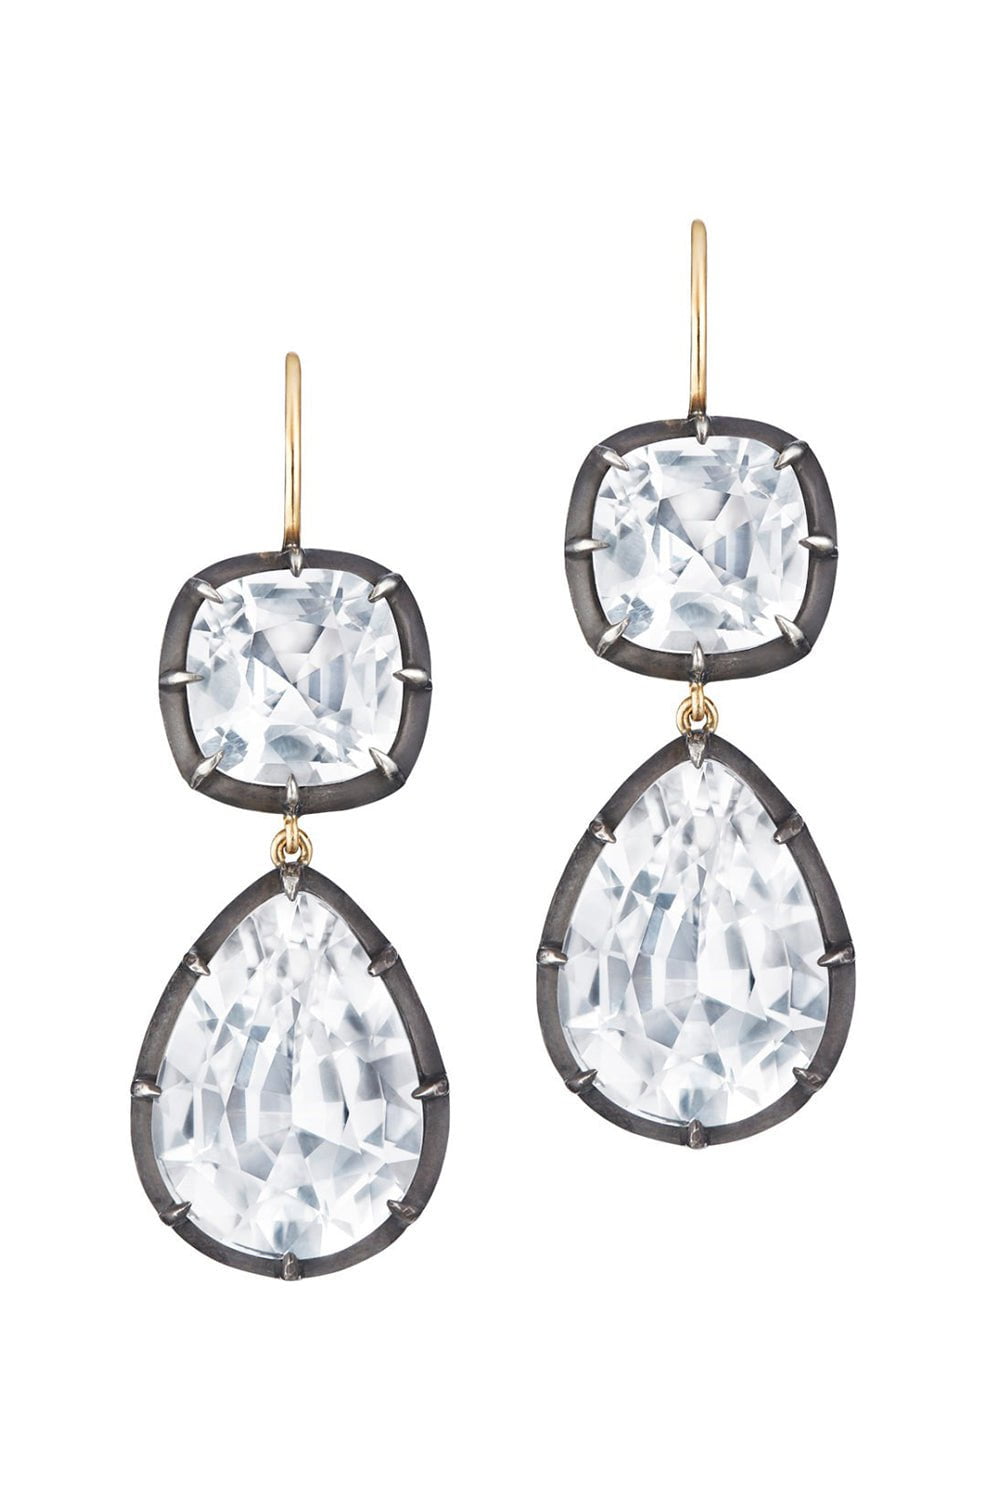 FRED LEIGHTON-White Topaz Collet Double Drop Earrings-YELLOW GOLD